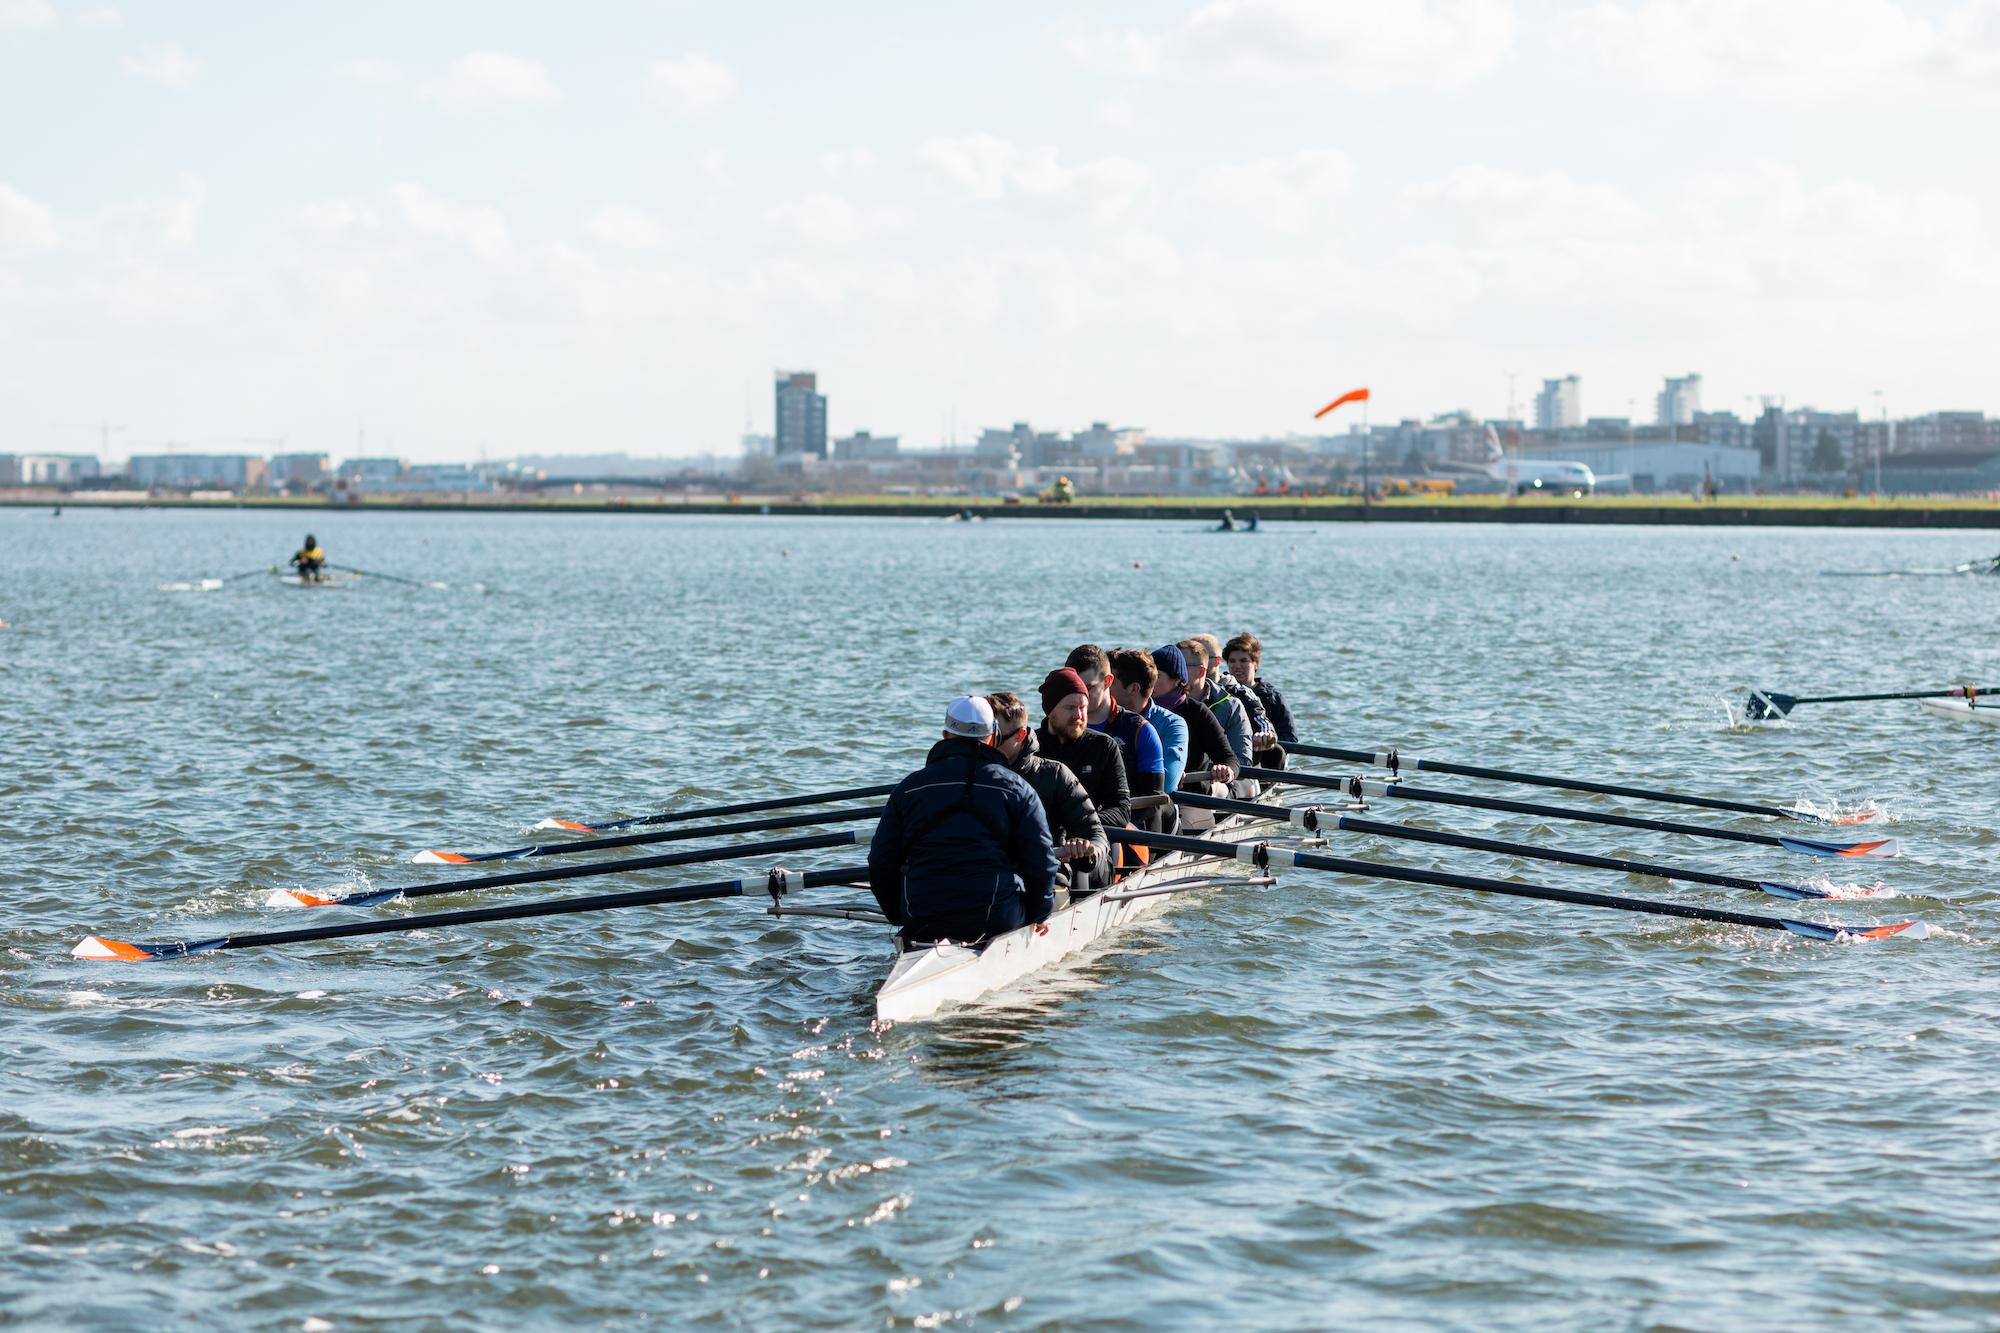 rowers on the water with the airport in the background